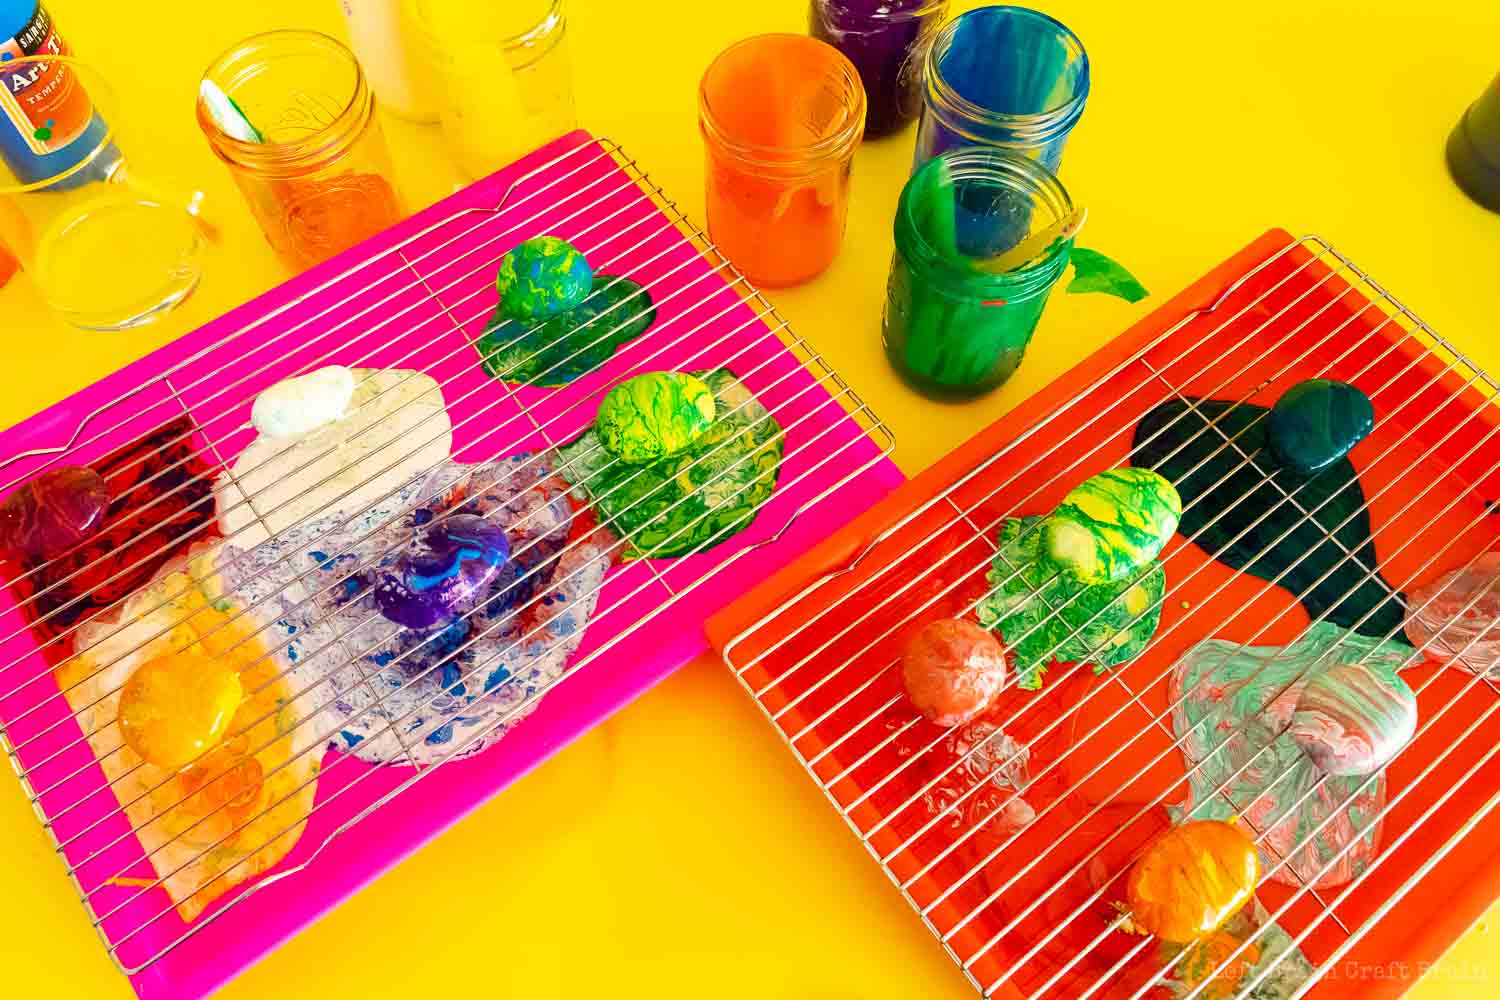 pour painted garden rocks on wire rocks on trays with jars of paint